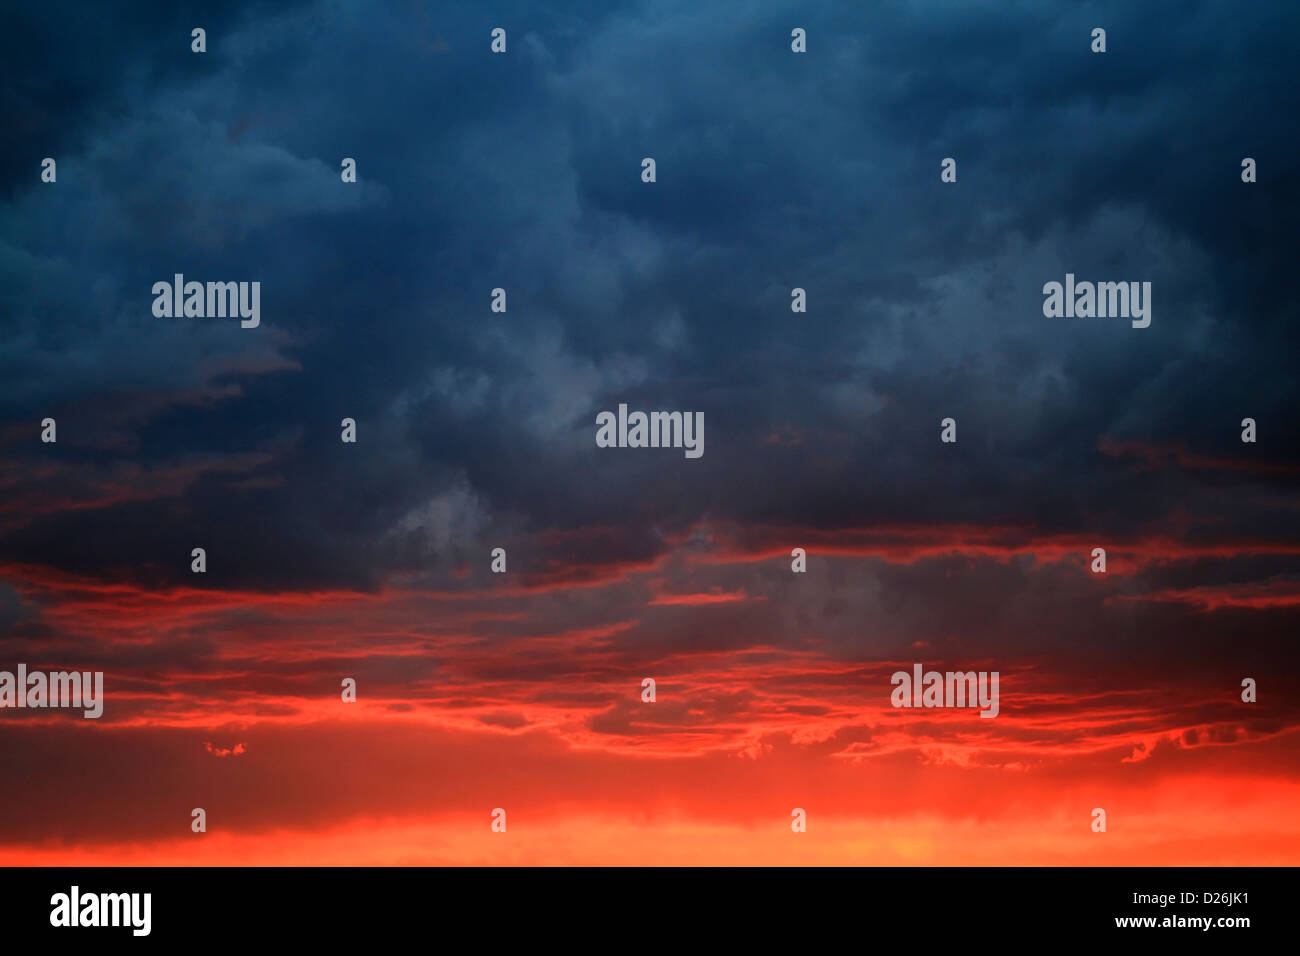 Ominous clouds above fiery sunset Stock Photo